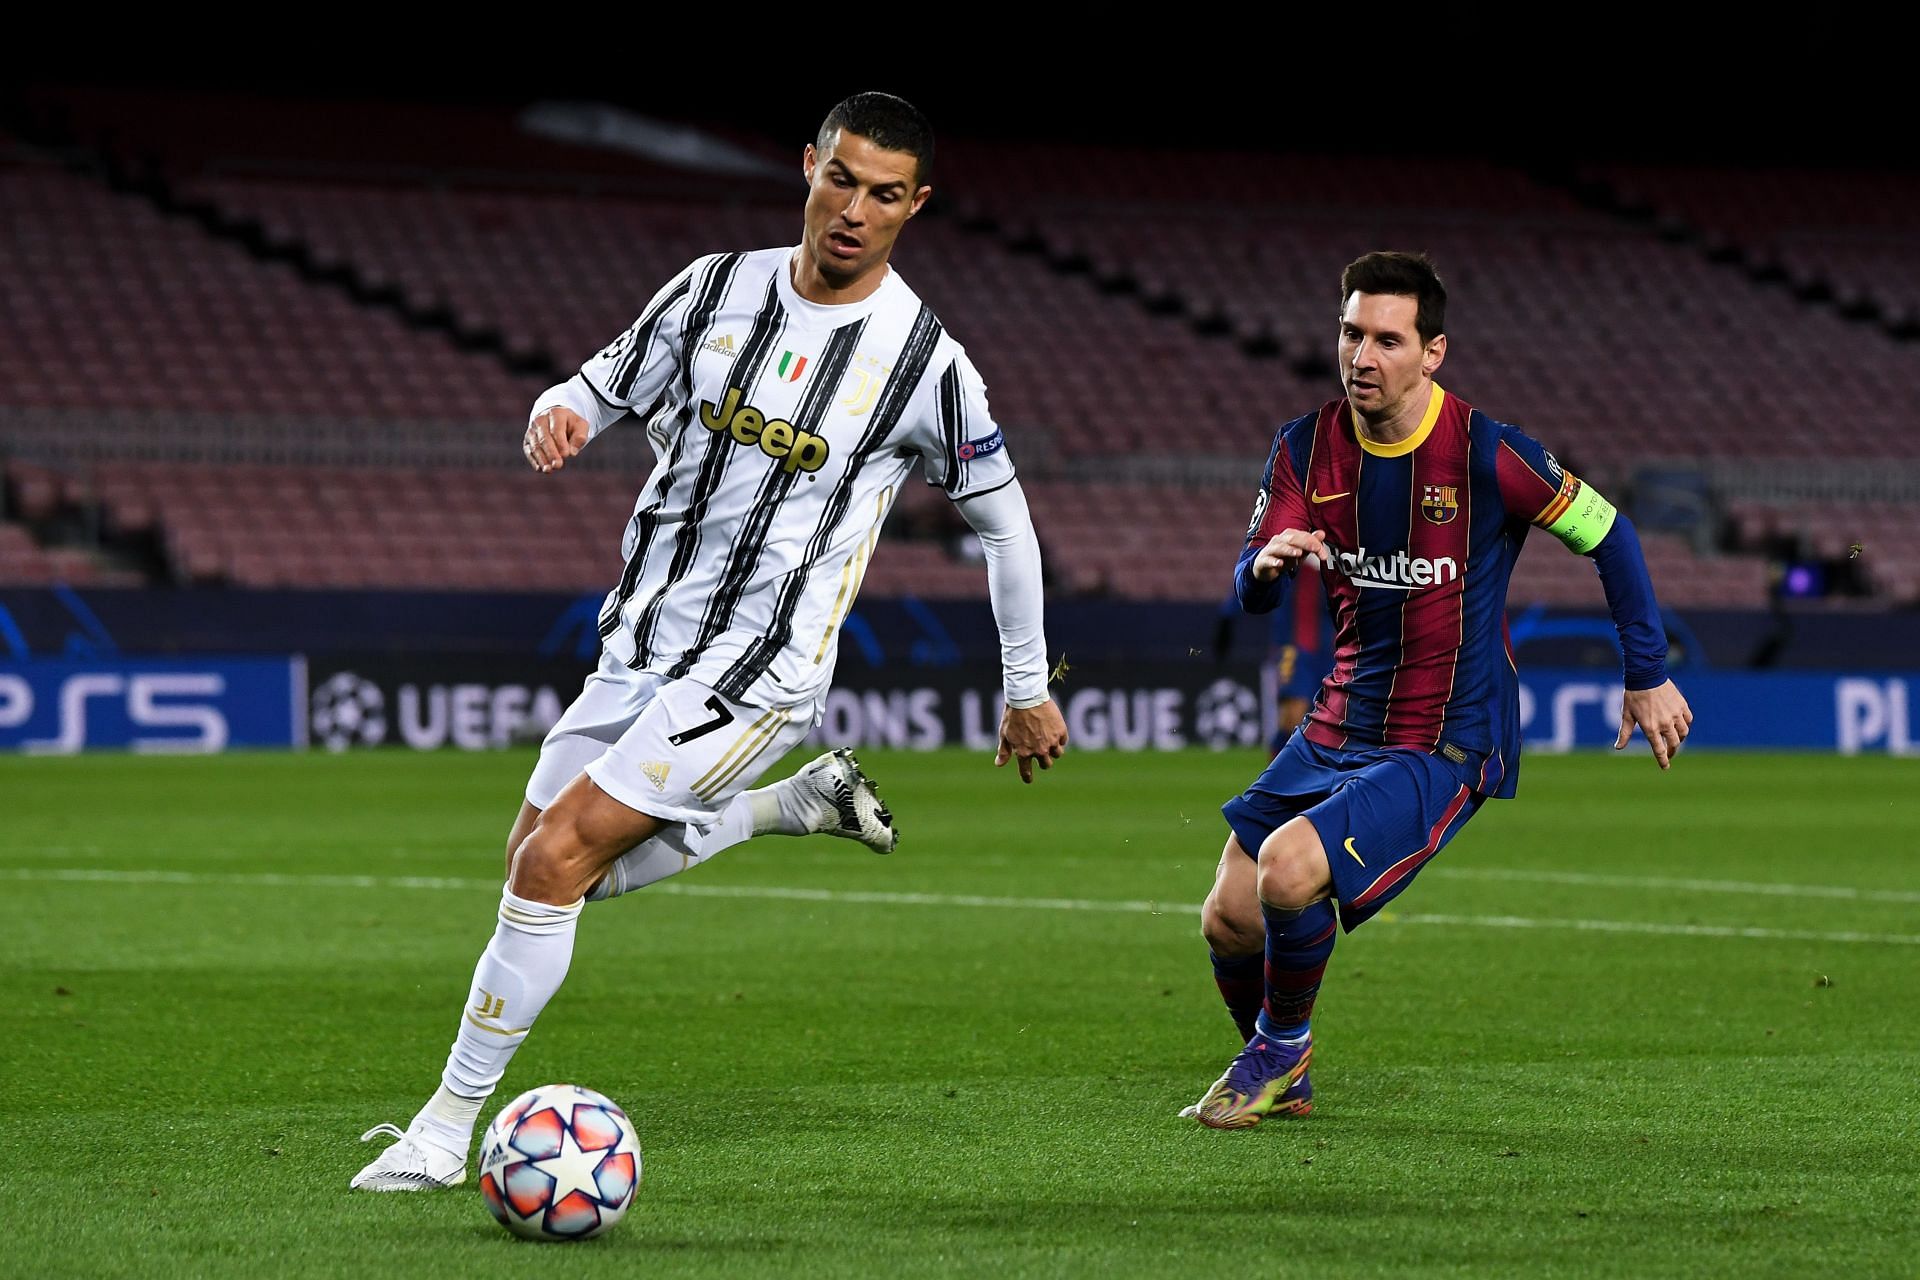 Cristiano Ronaldo (left) and Lionel Messi are two of the top scorers in FIFA Club World Cup history